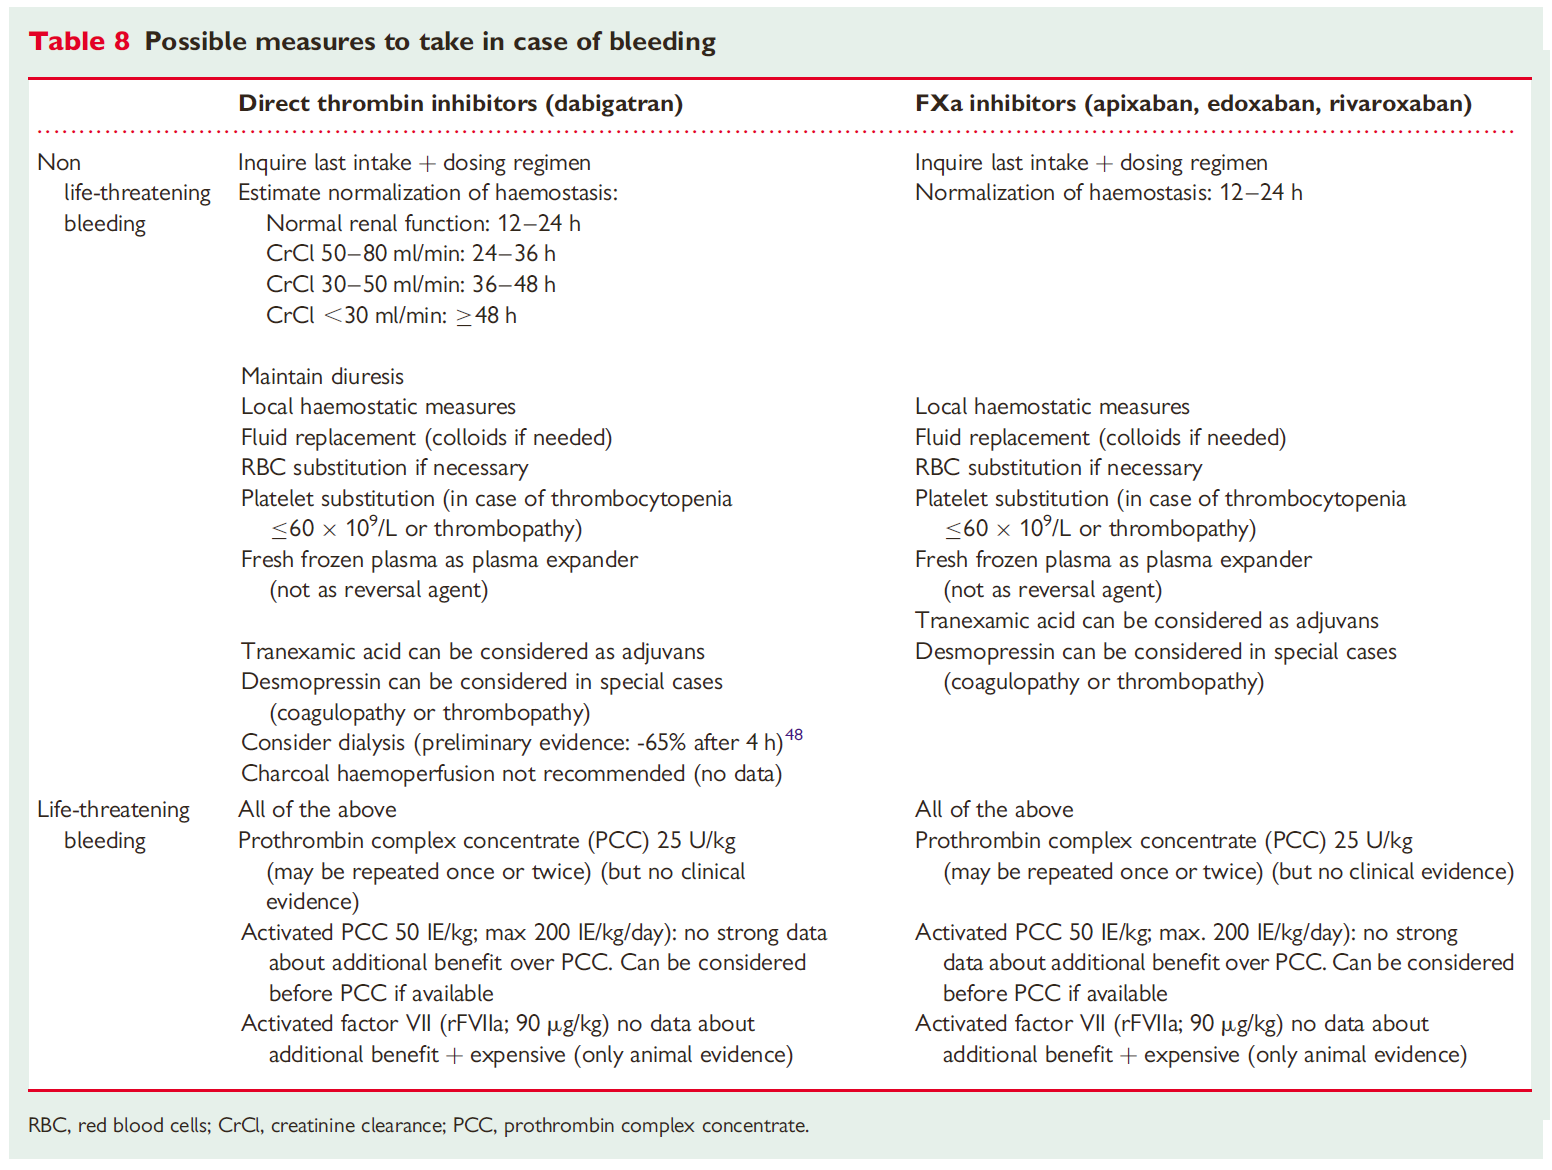 Pag. 45 / 71 EHRA Practical Guide on the use of new oral anticoagulants in patients with